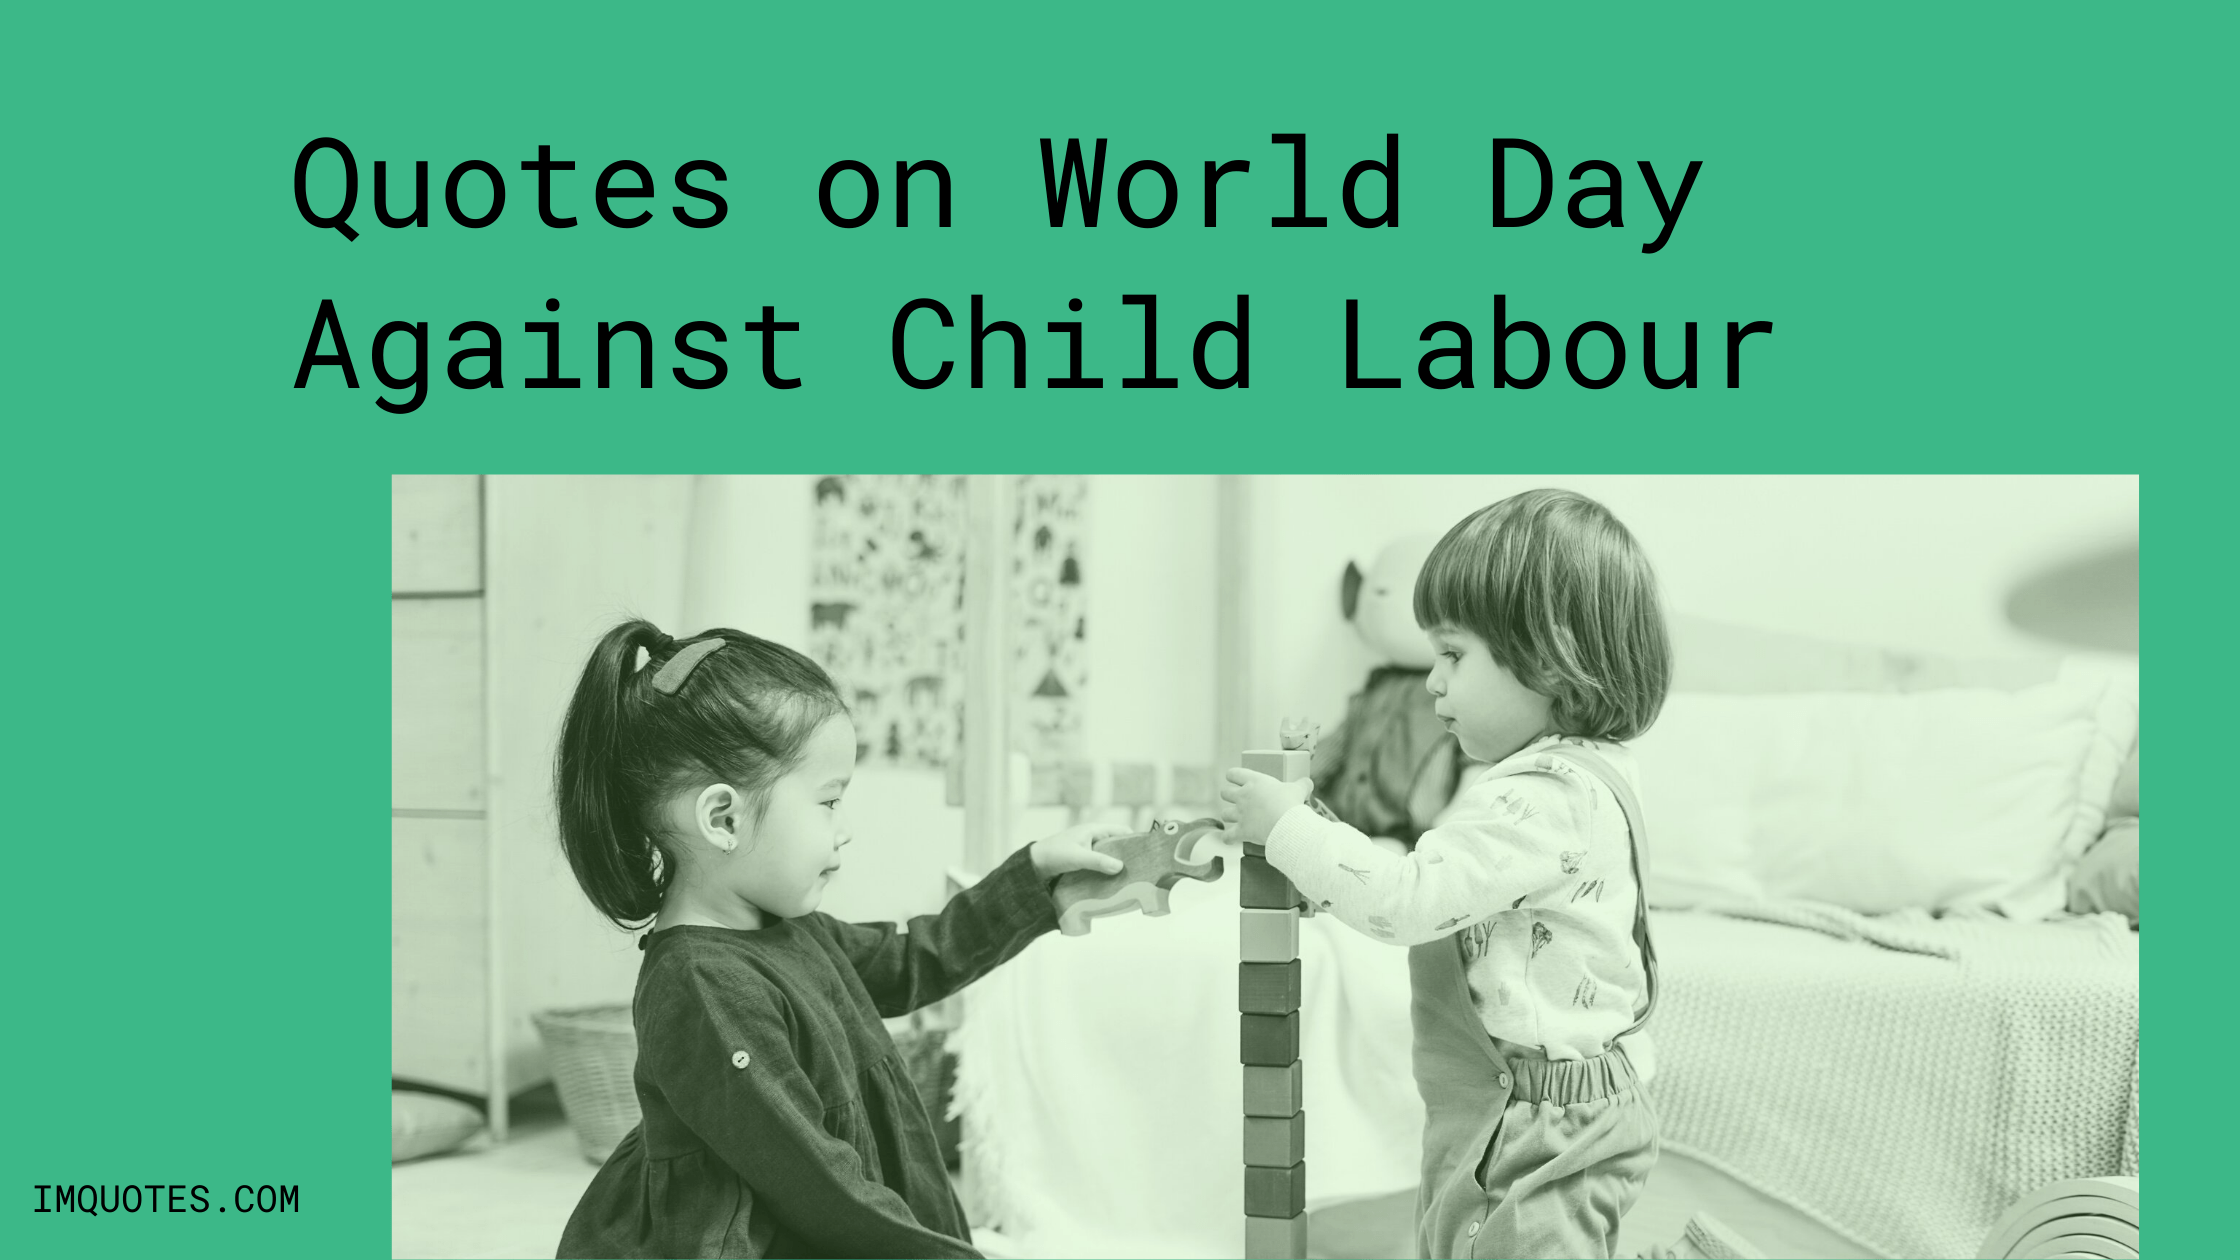 Quotes on World Day Against Child Labour